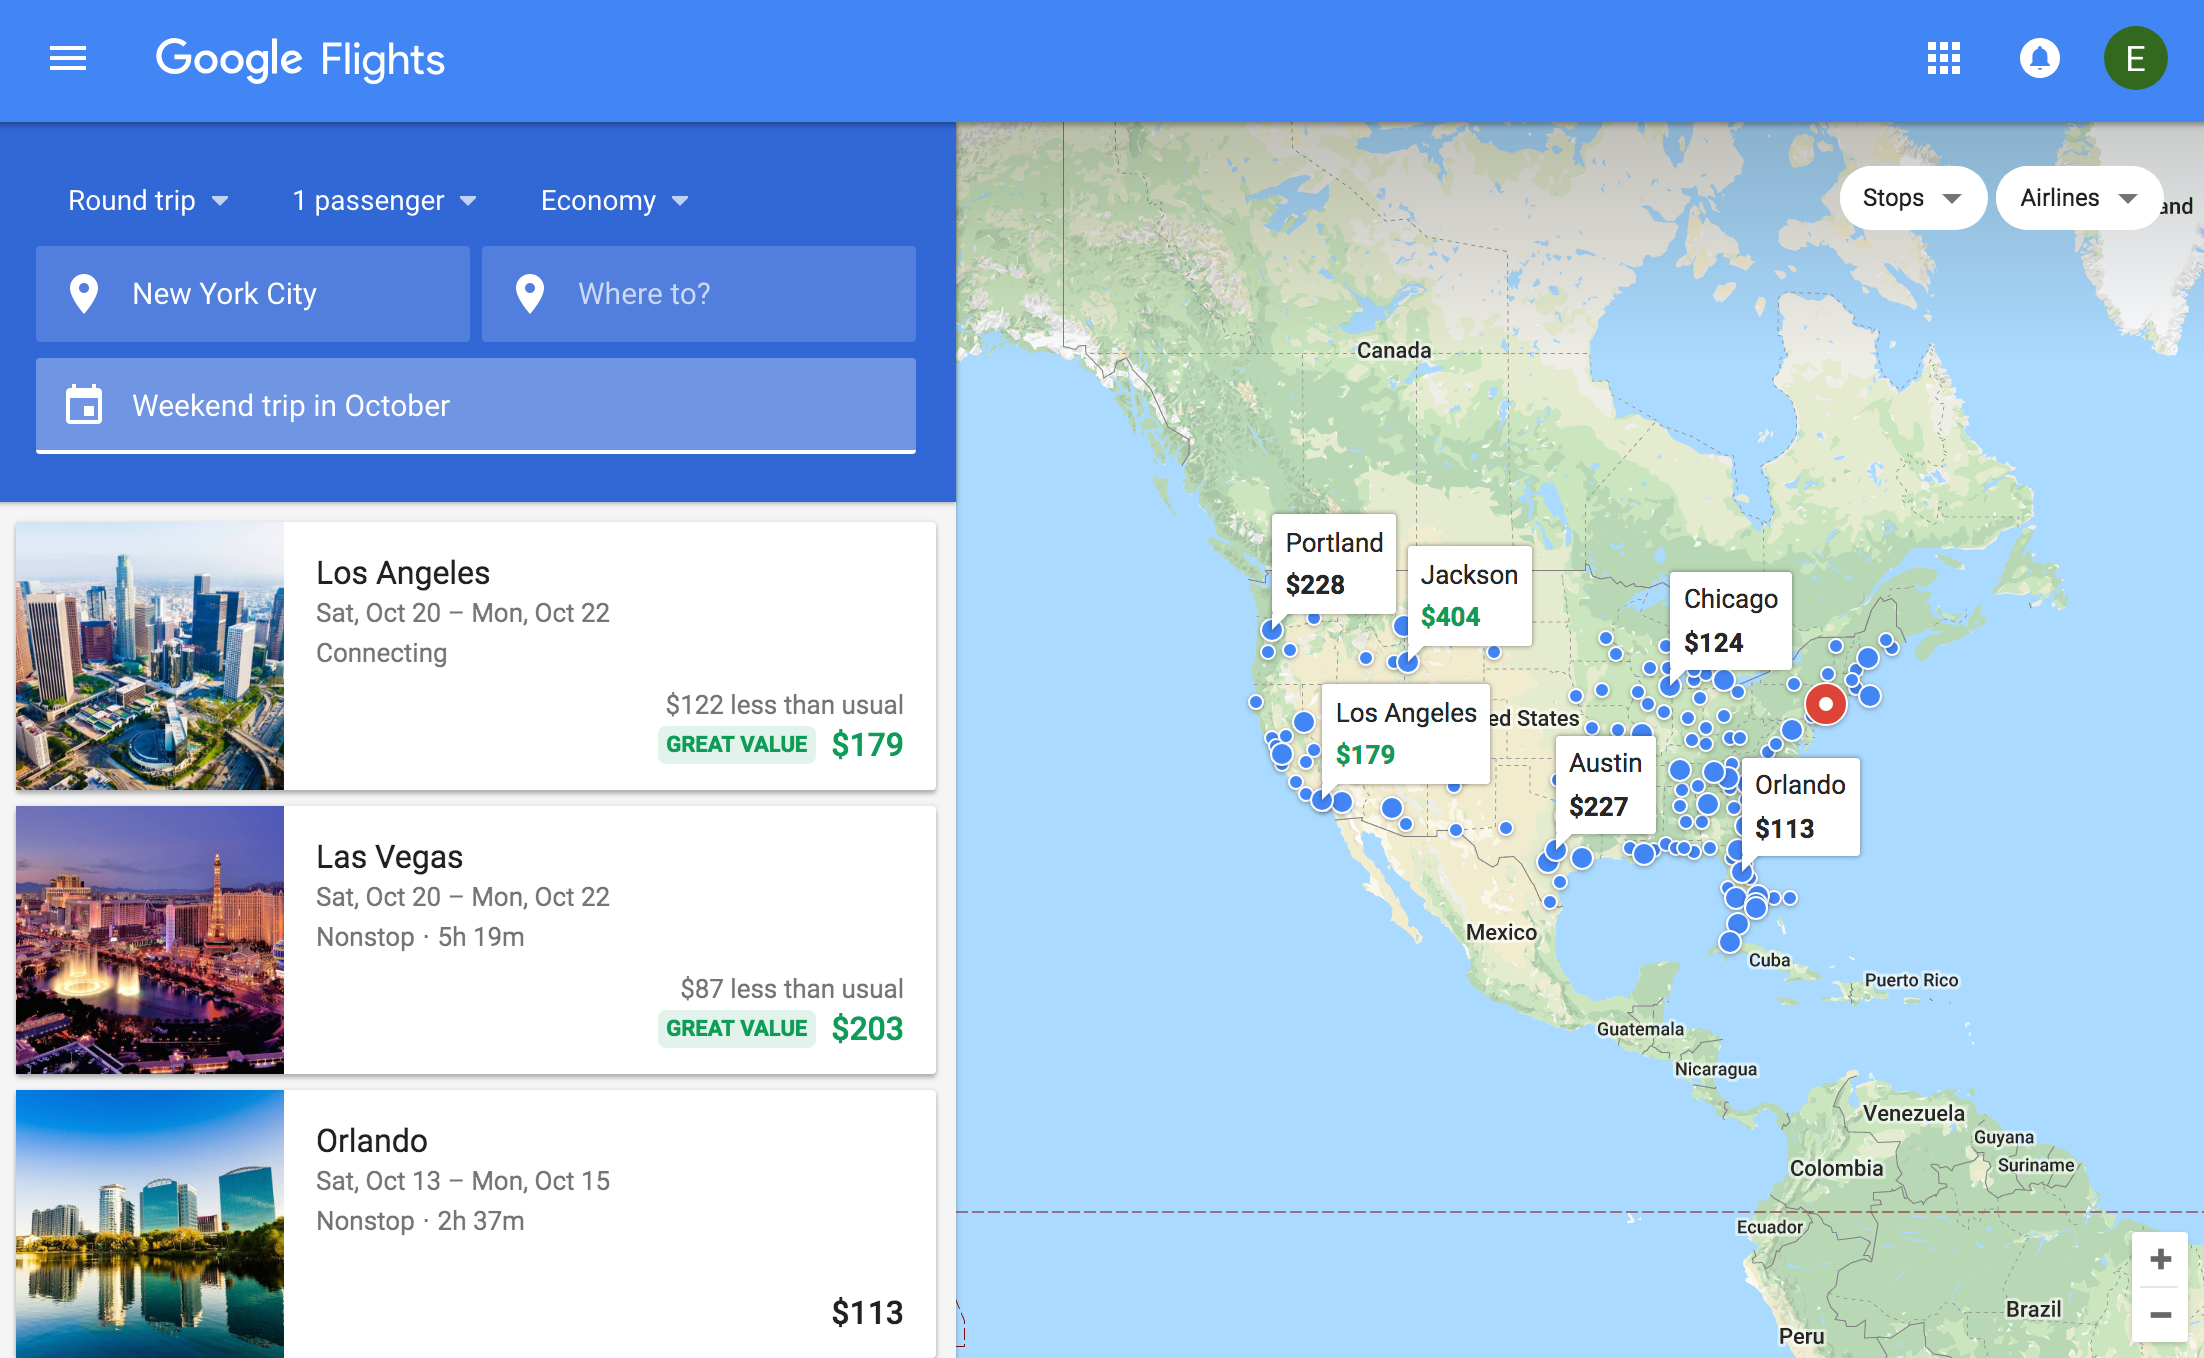 Google Flights Introduces 2 New Features to Help You Find the Cheapest